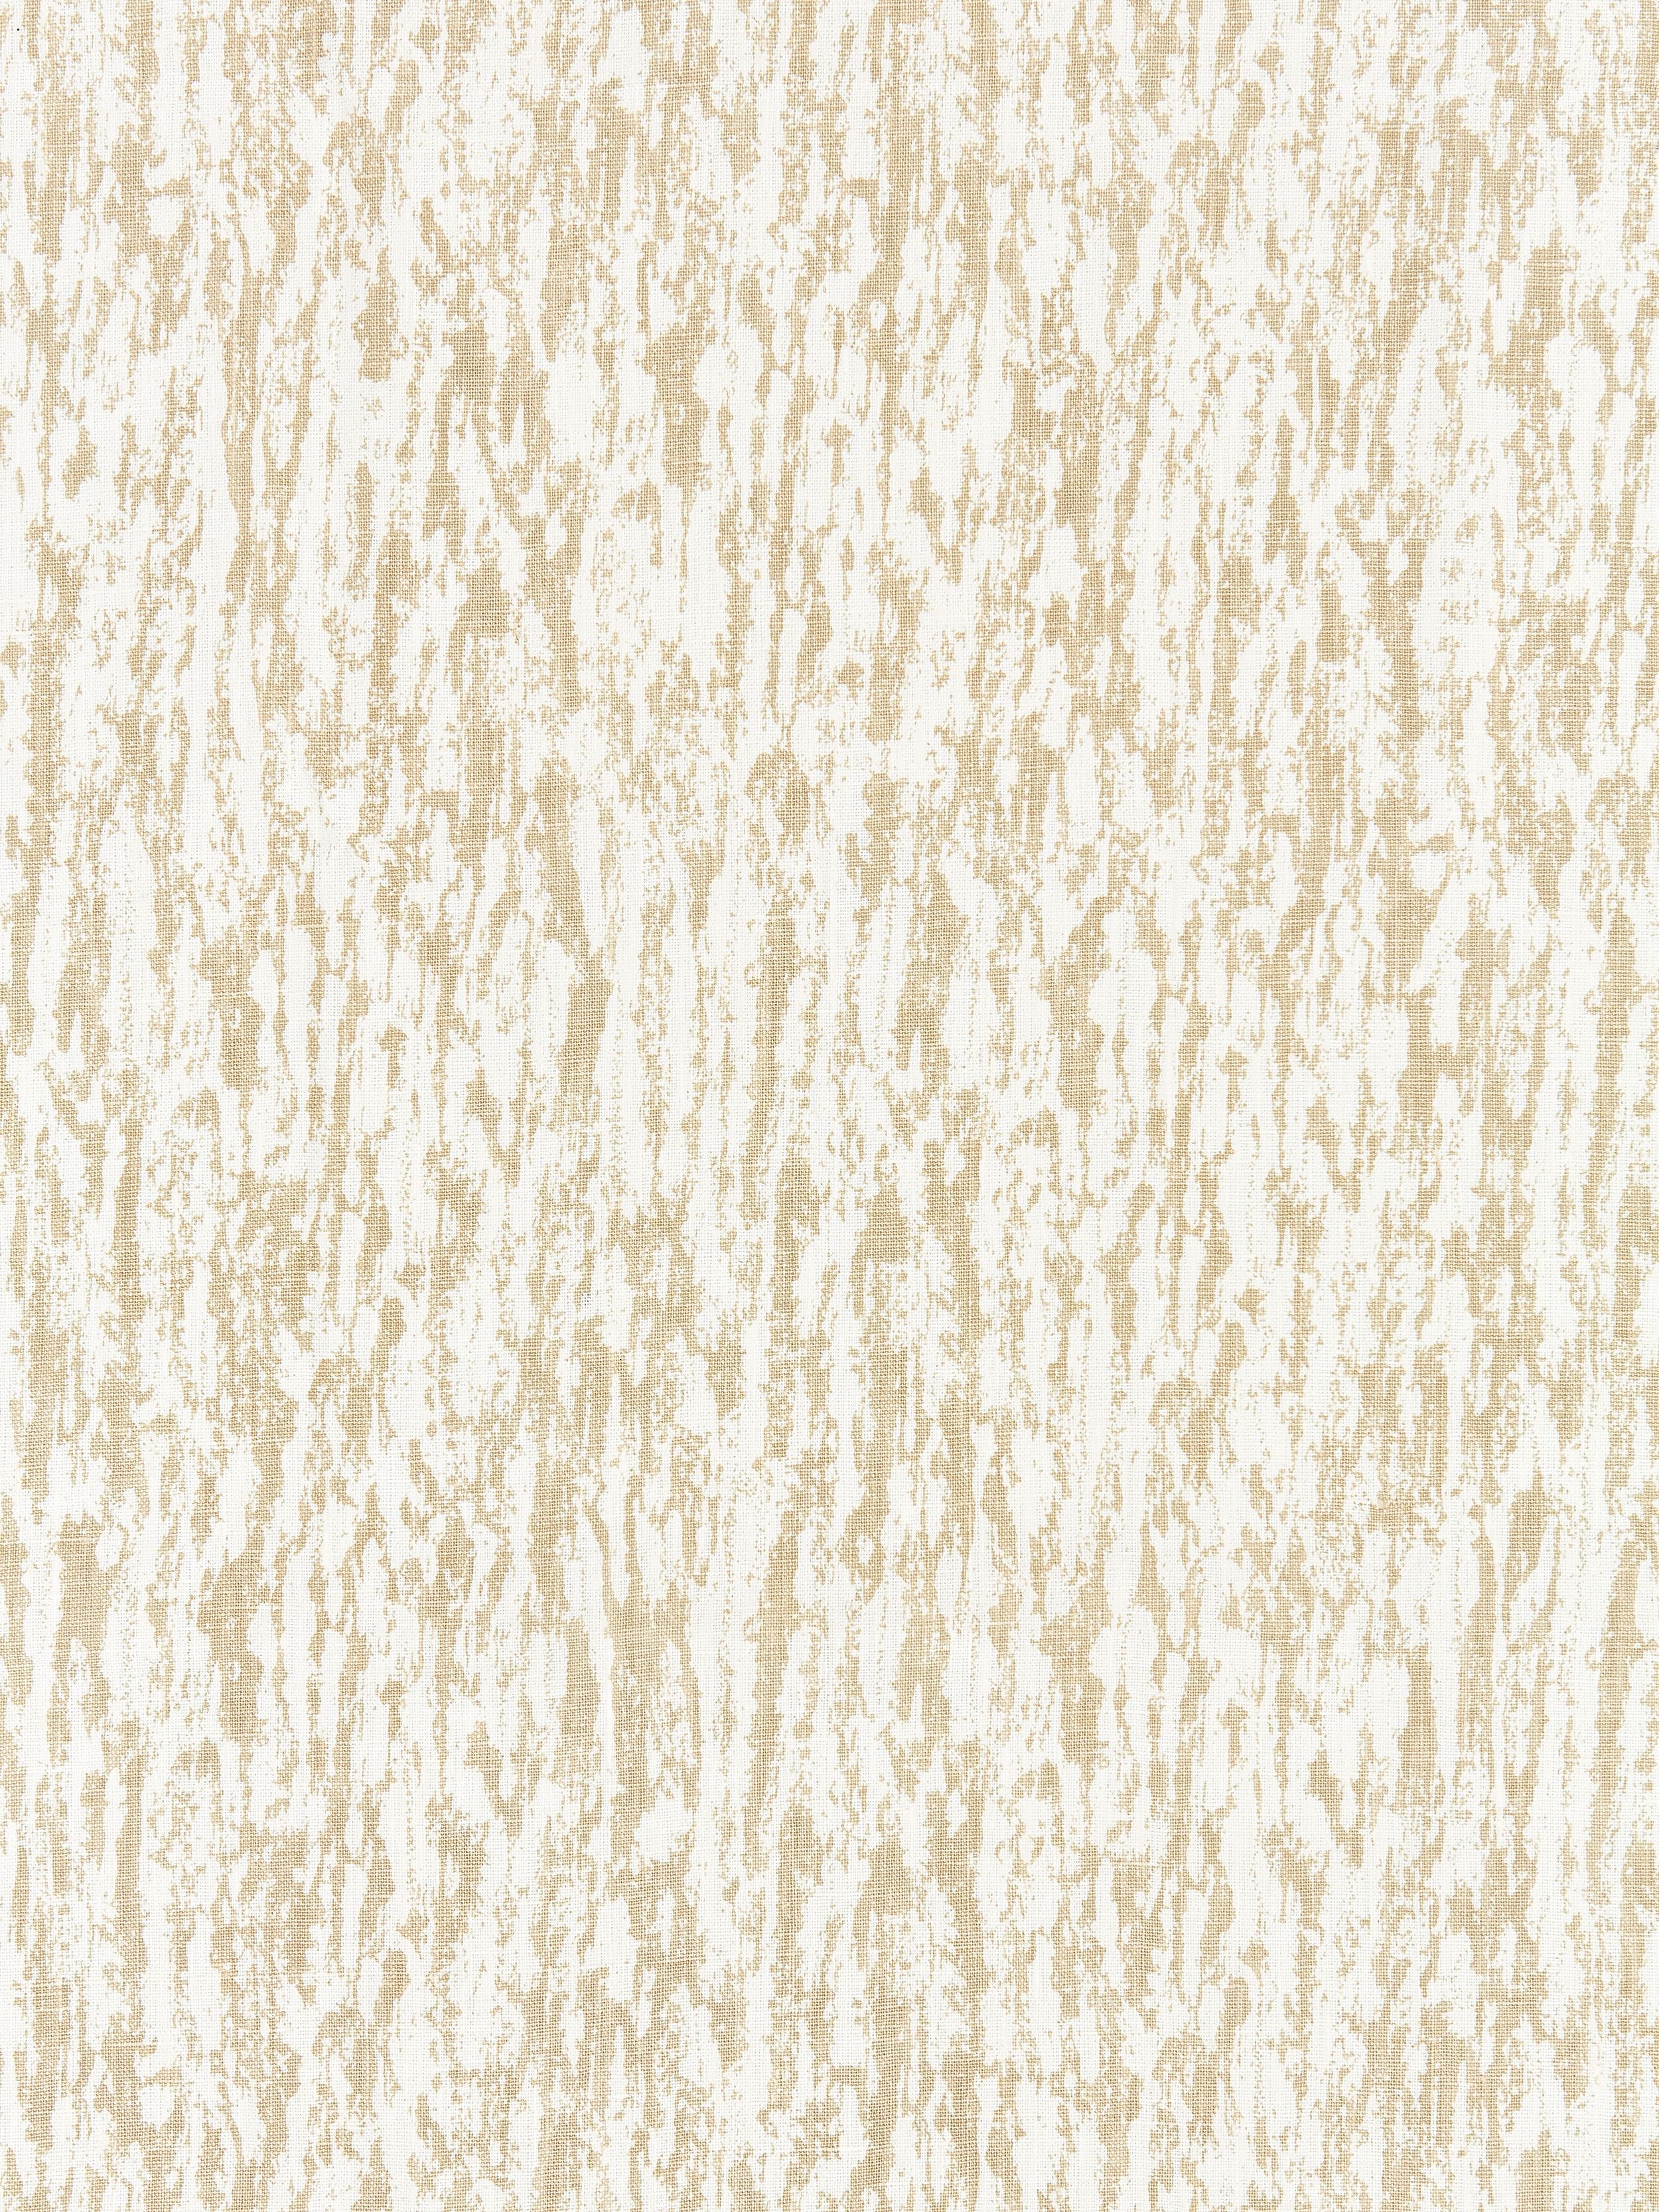 Sequoia Linen Print fabric in sand color - pattern number SC 000116599 - by Scalamandre in the Scalamandre Fabrics Book 1 collection